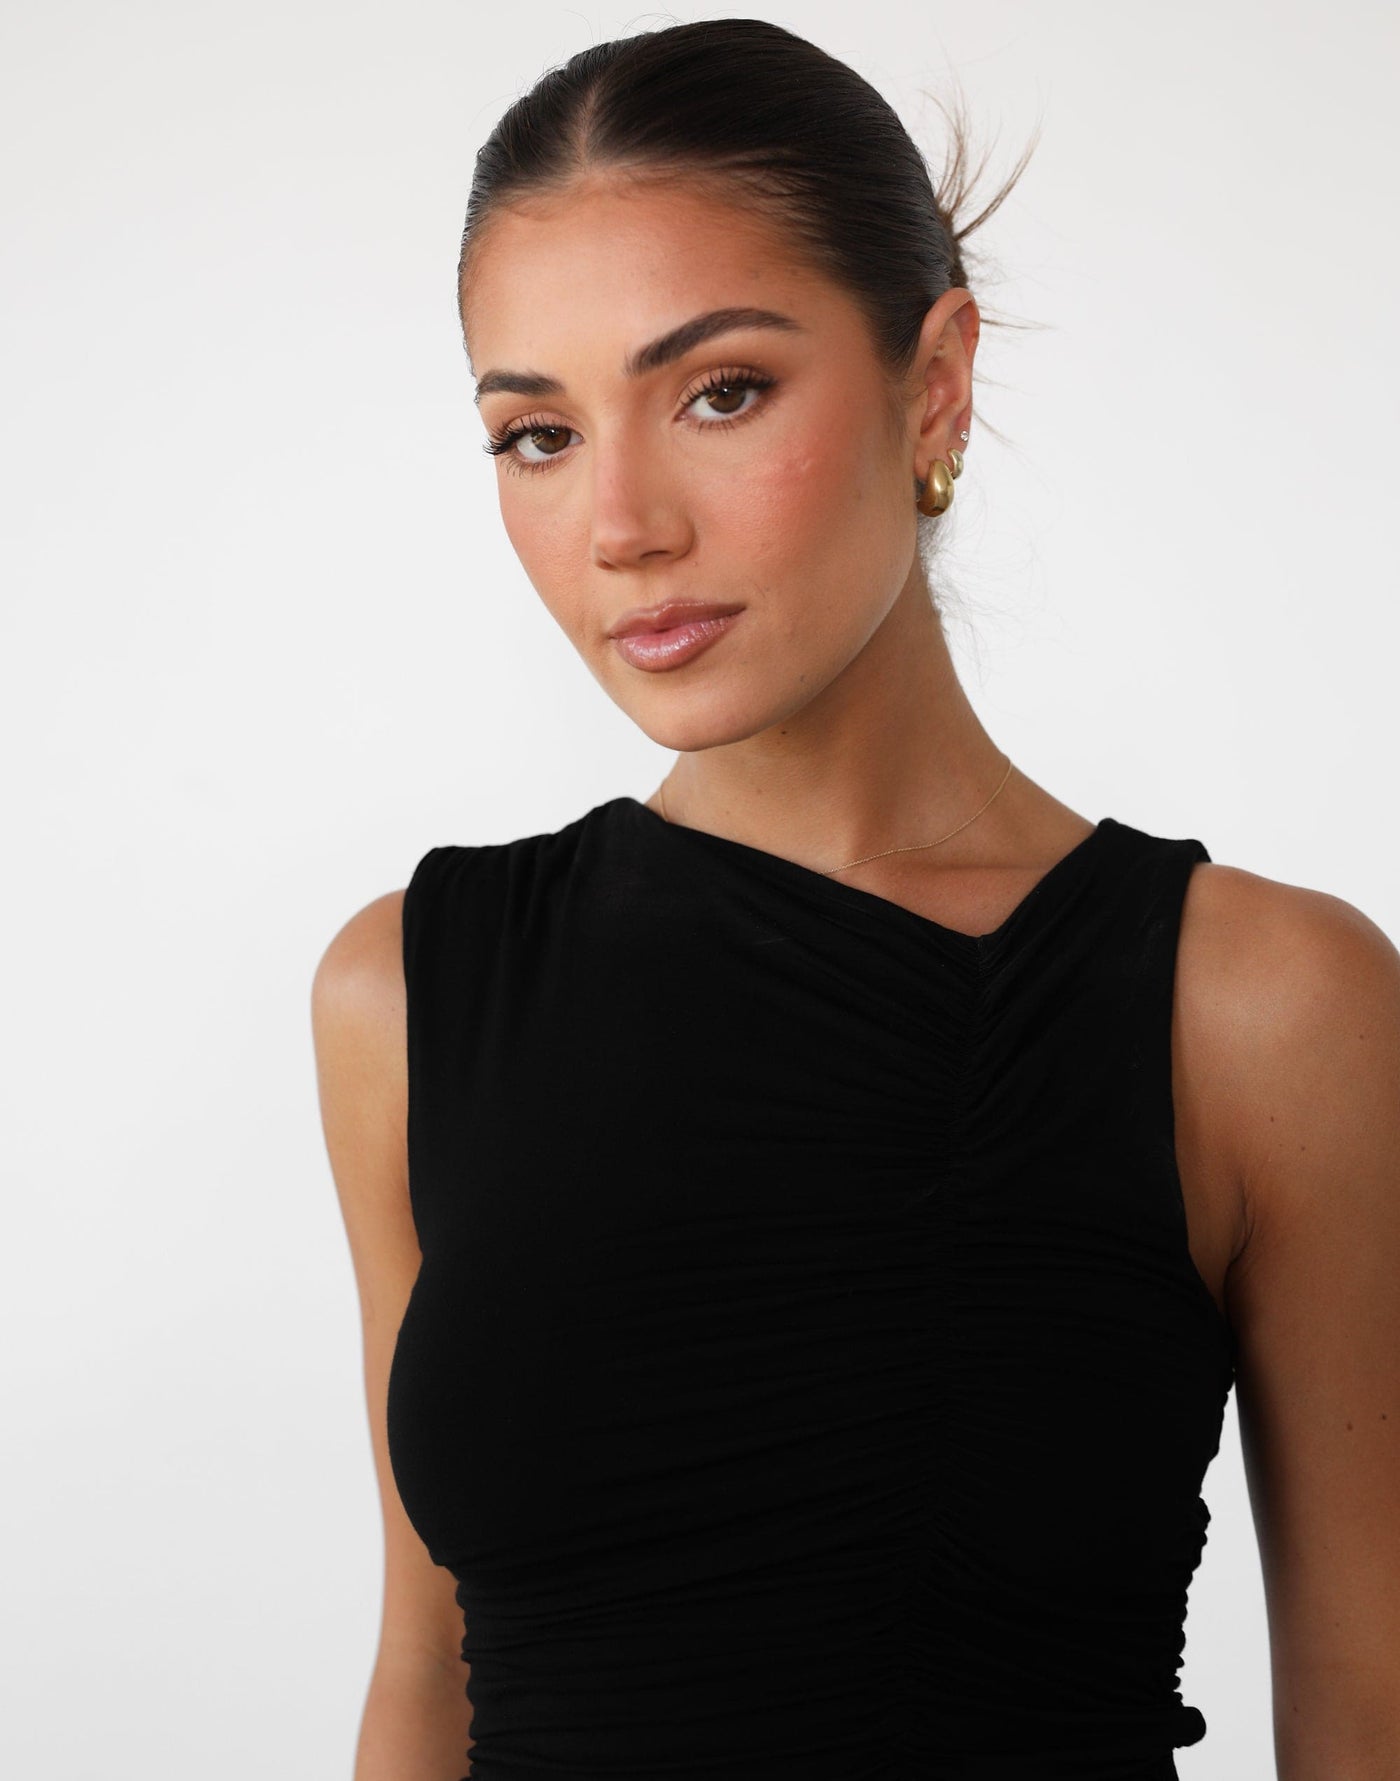 Delphine Tank Top (Black) - Bodycon Jersey Gathered Detail Top - Women's Top - Charcoal Clothing